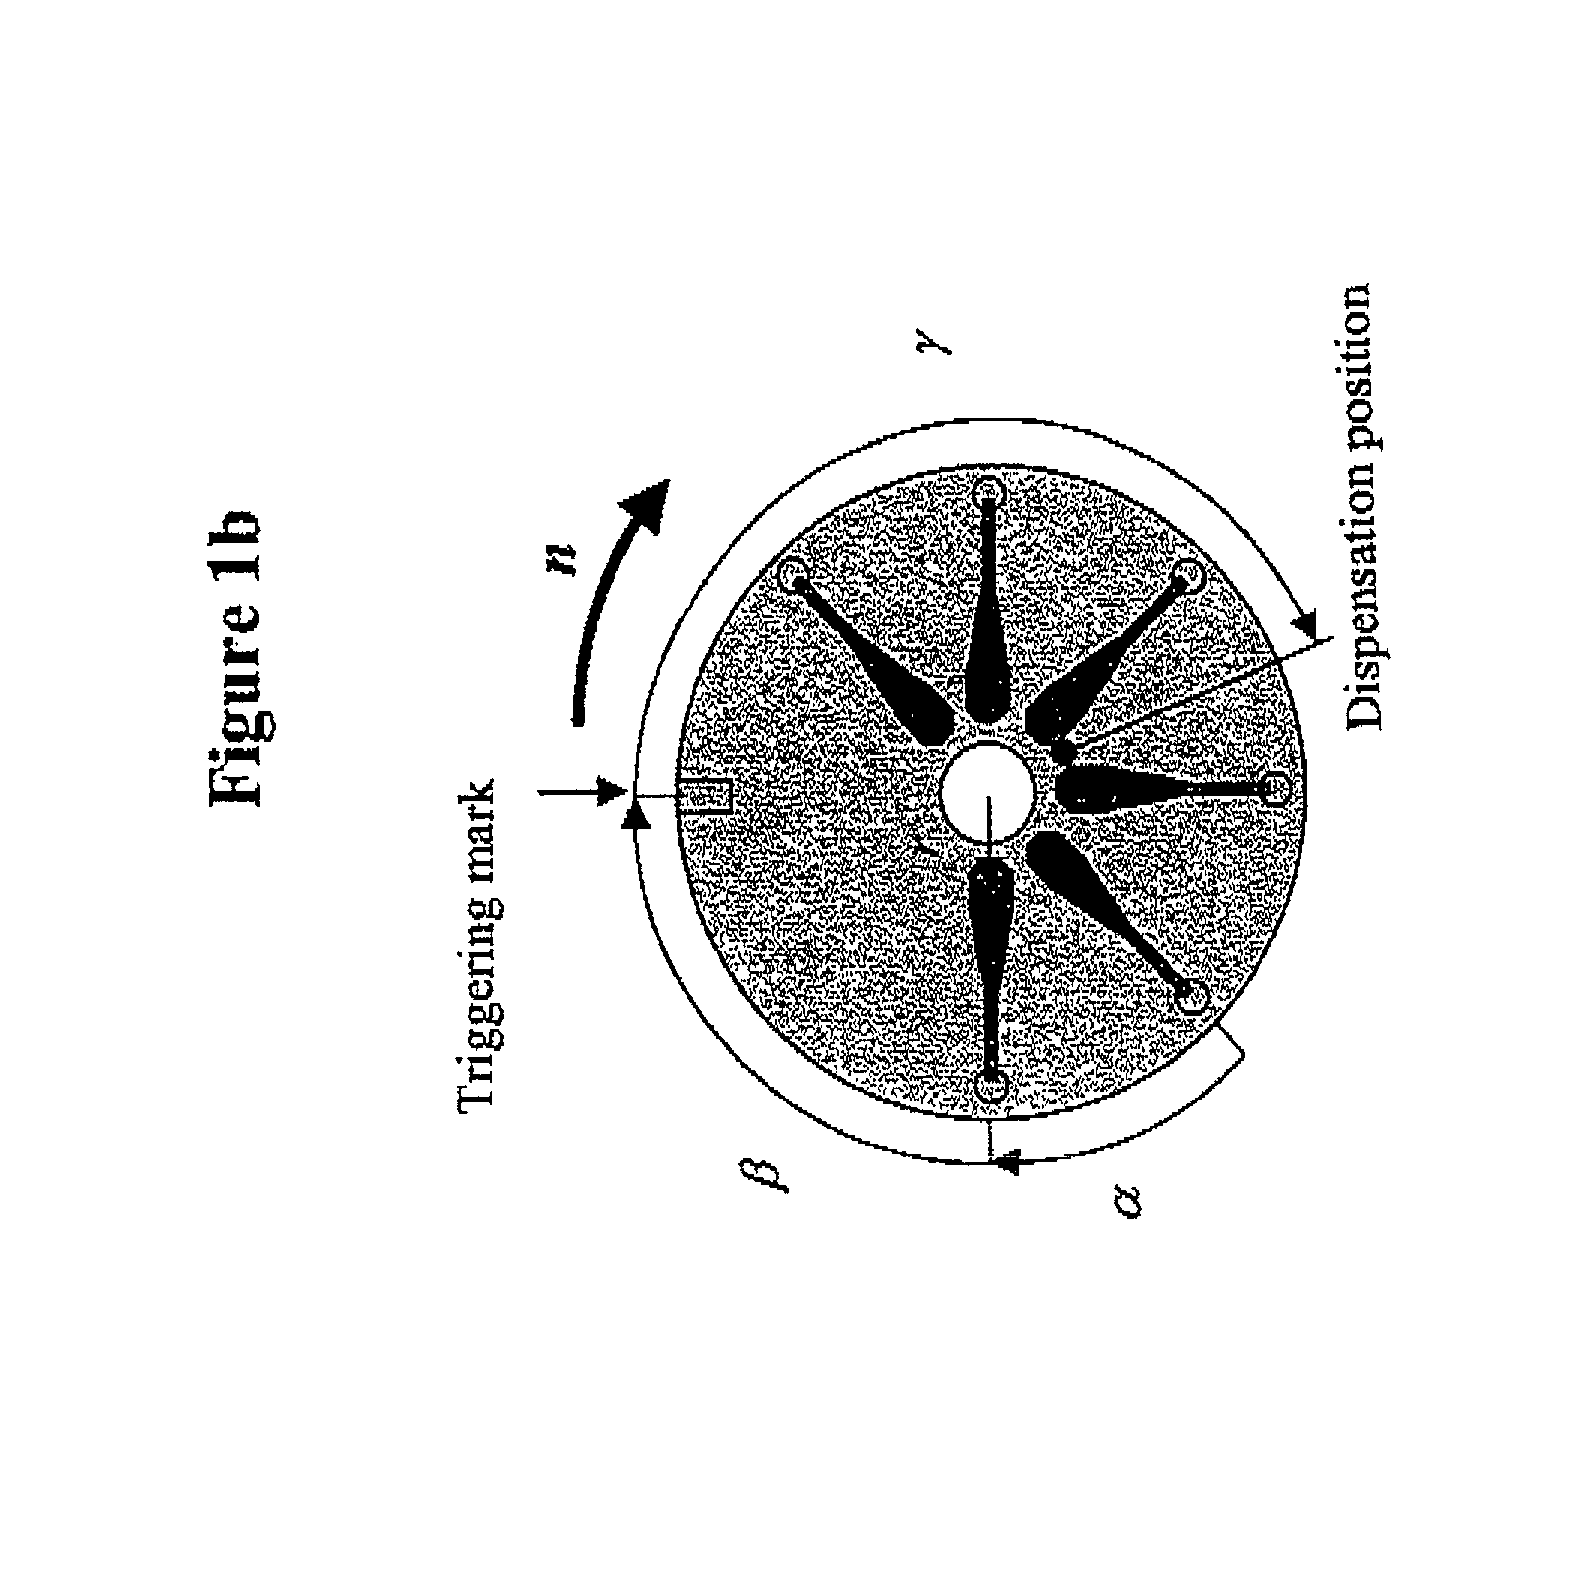 Method and instrumentation for micro dispensation of droplets